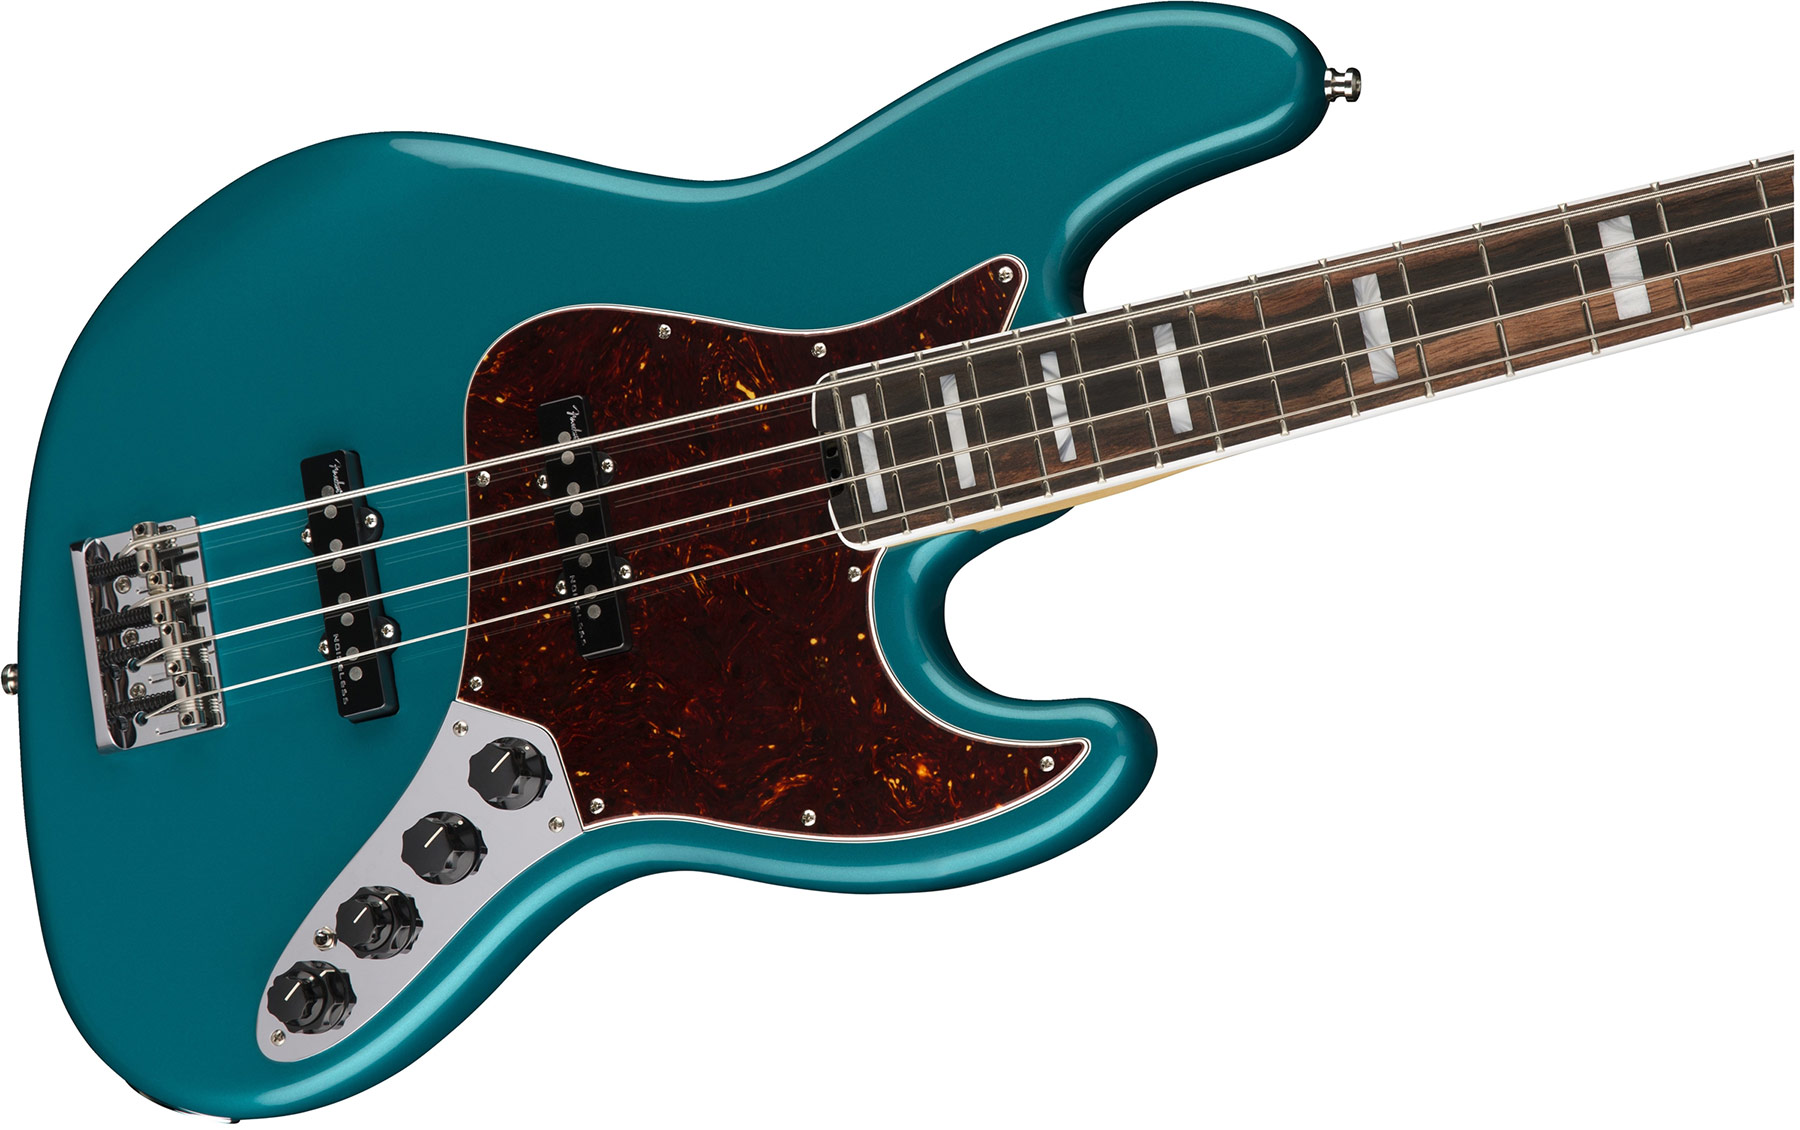 Fender American Elite Jazz Bass 2018 Usa Eb - Ocean Turquoise - Solid body electric bass - Variation 2